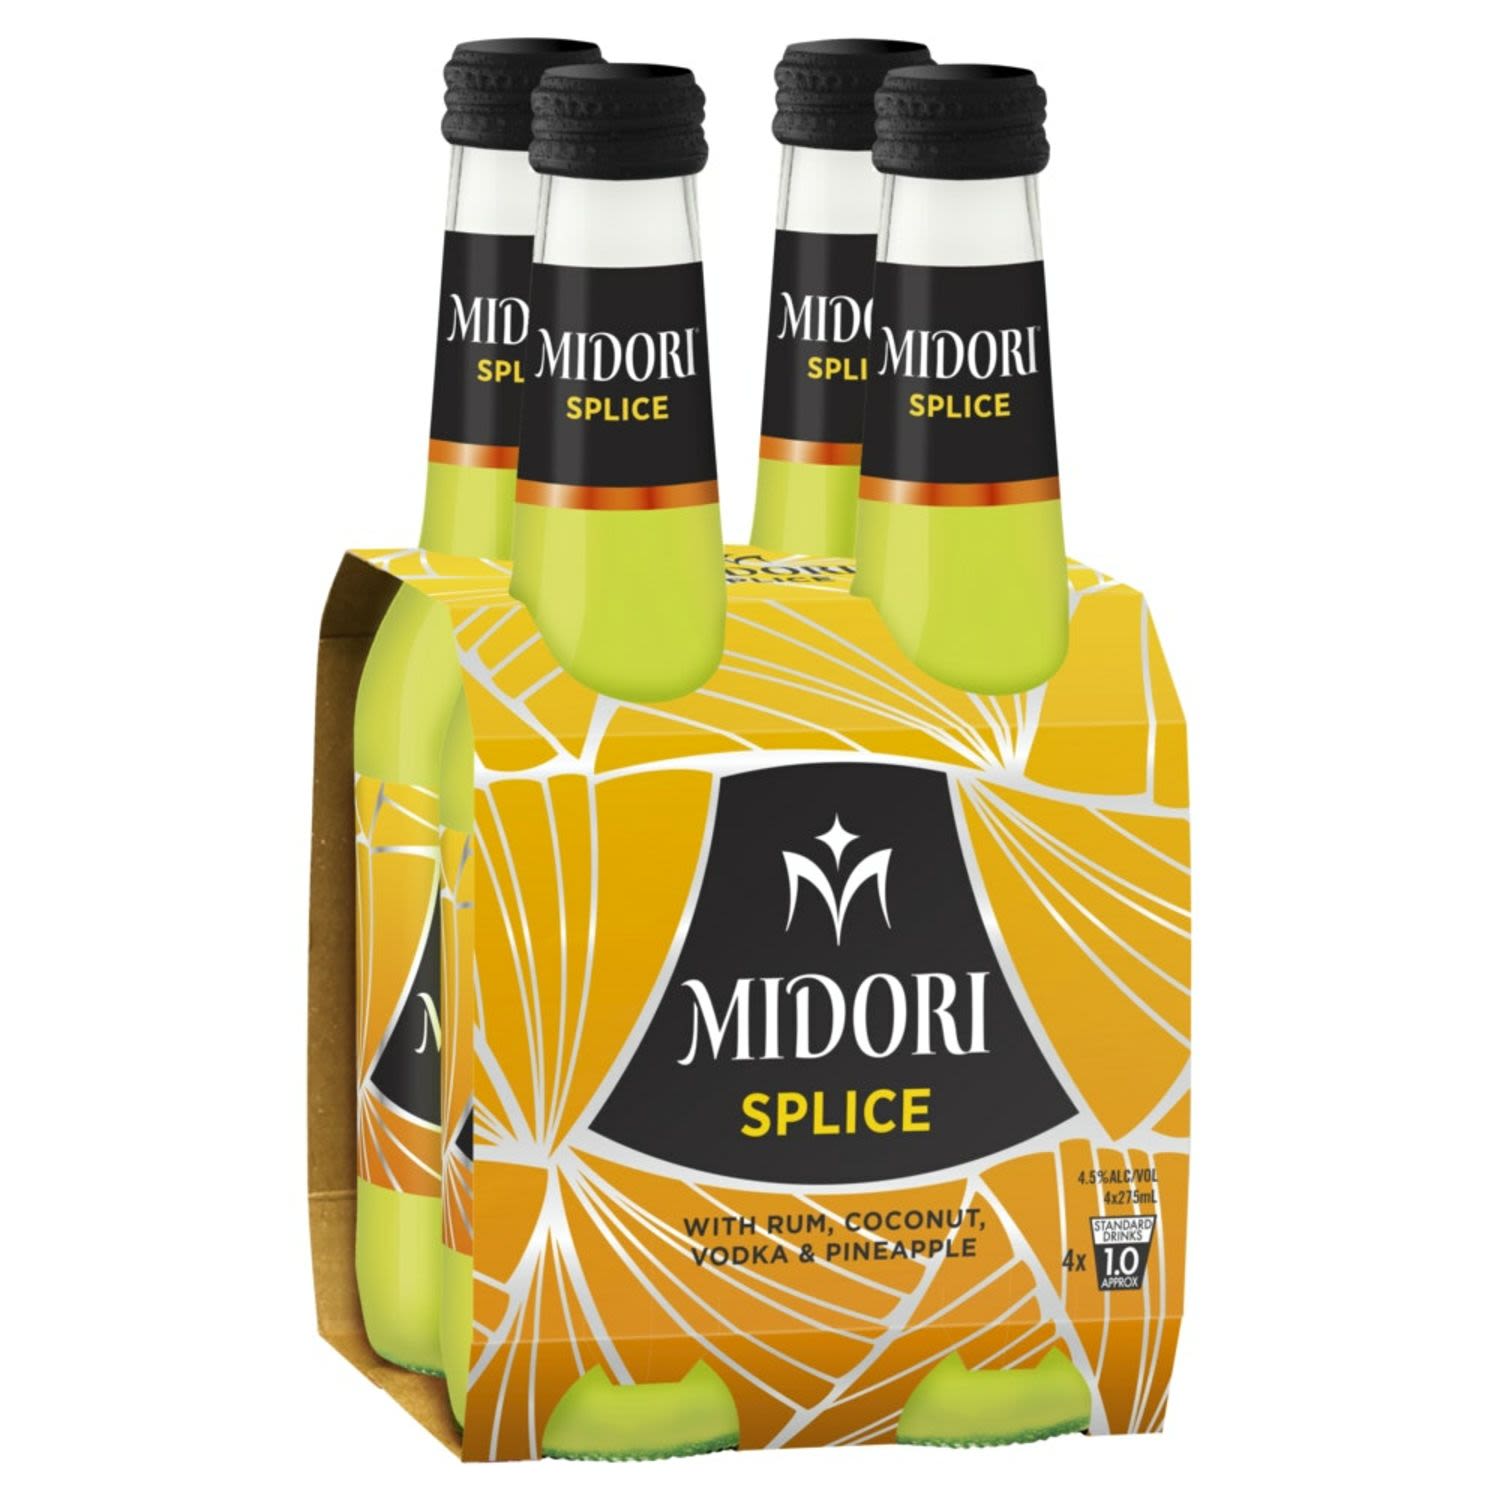 MIDORI splice has a distinct tropical taste with it's blends of fresh pineapple and coconut rum. MIDORI Splice has long been an Australian favourite in bars as both a long drink and a shaker.<br /> <br />Alcohol Volume: 4.50%<br /><br />Pack Format: 4 Pack<br /><br />Standard Drinks: 1</br /><br />Pack Type: Bottle<br />